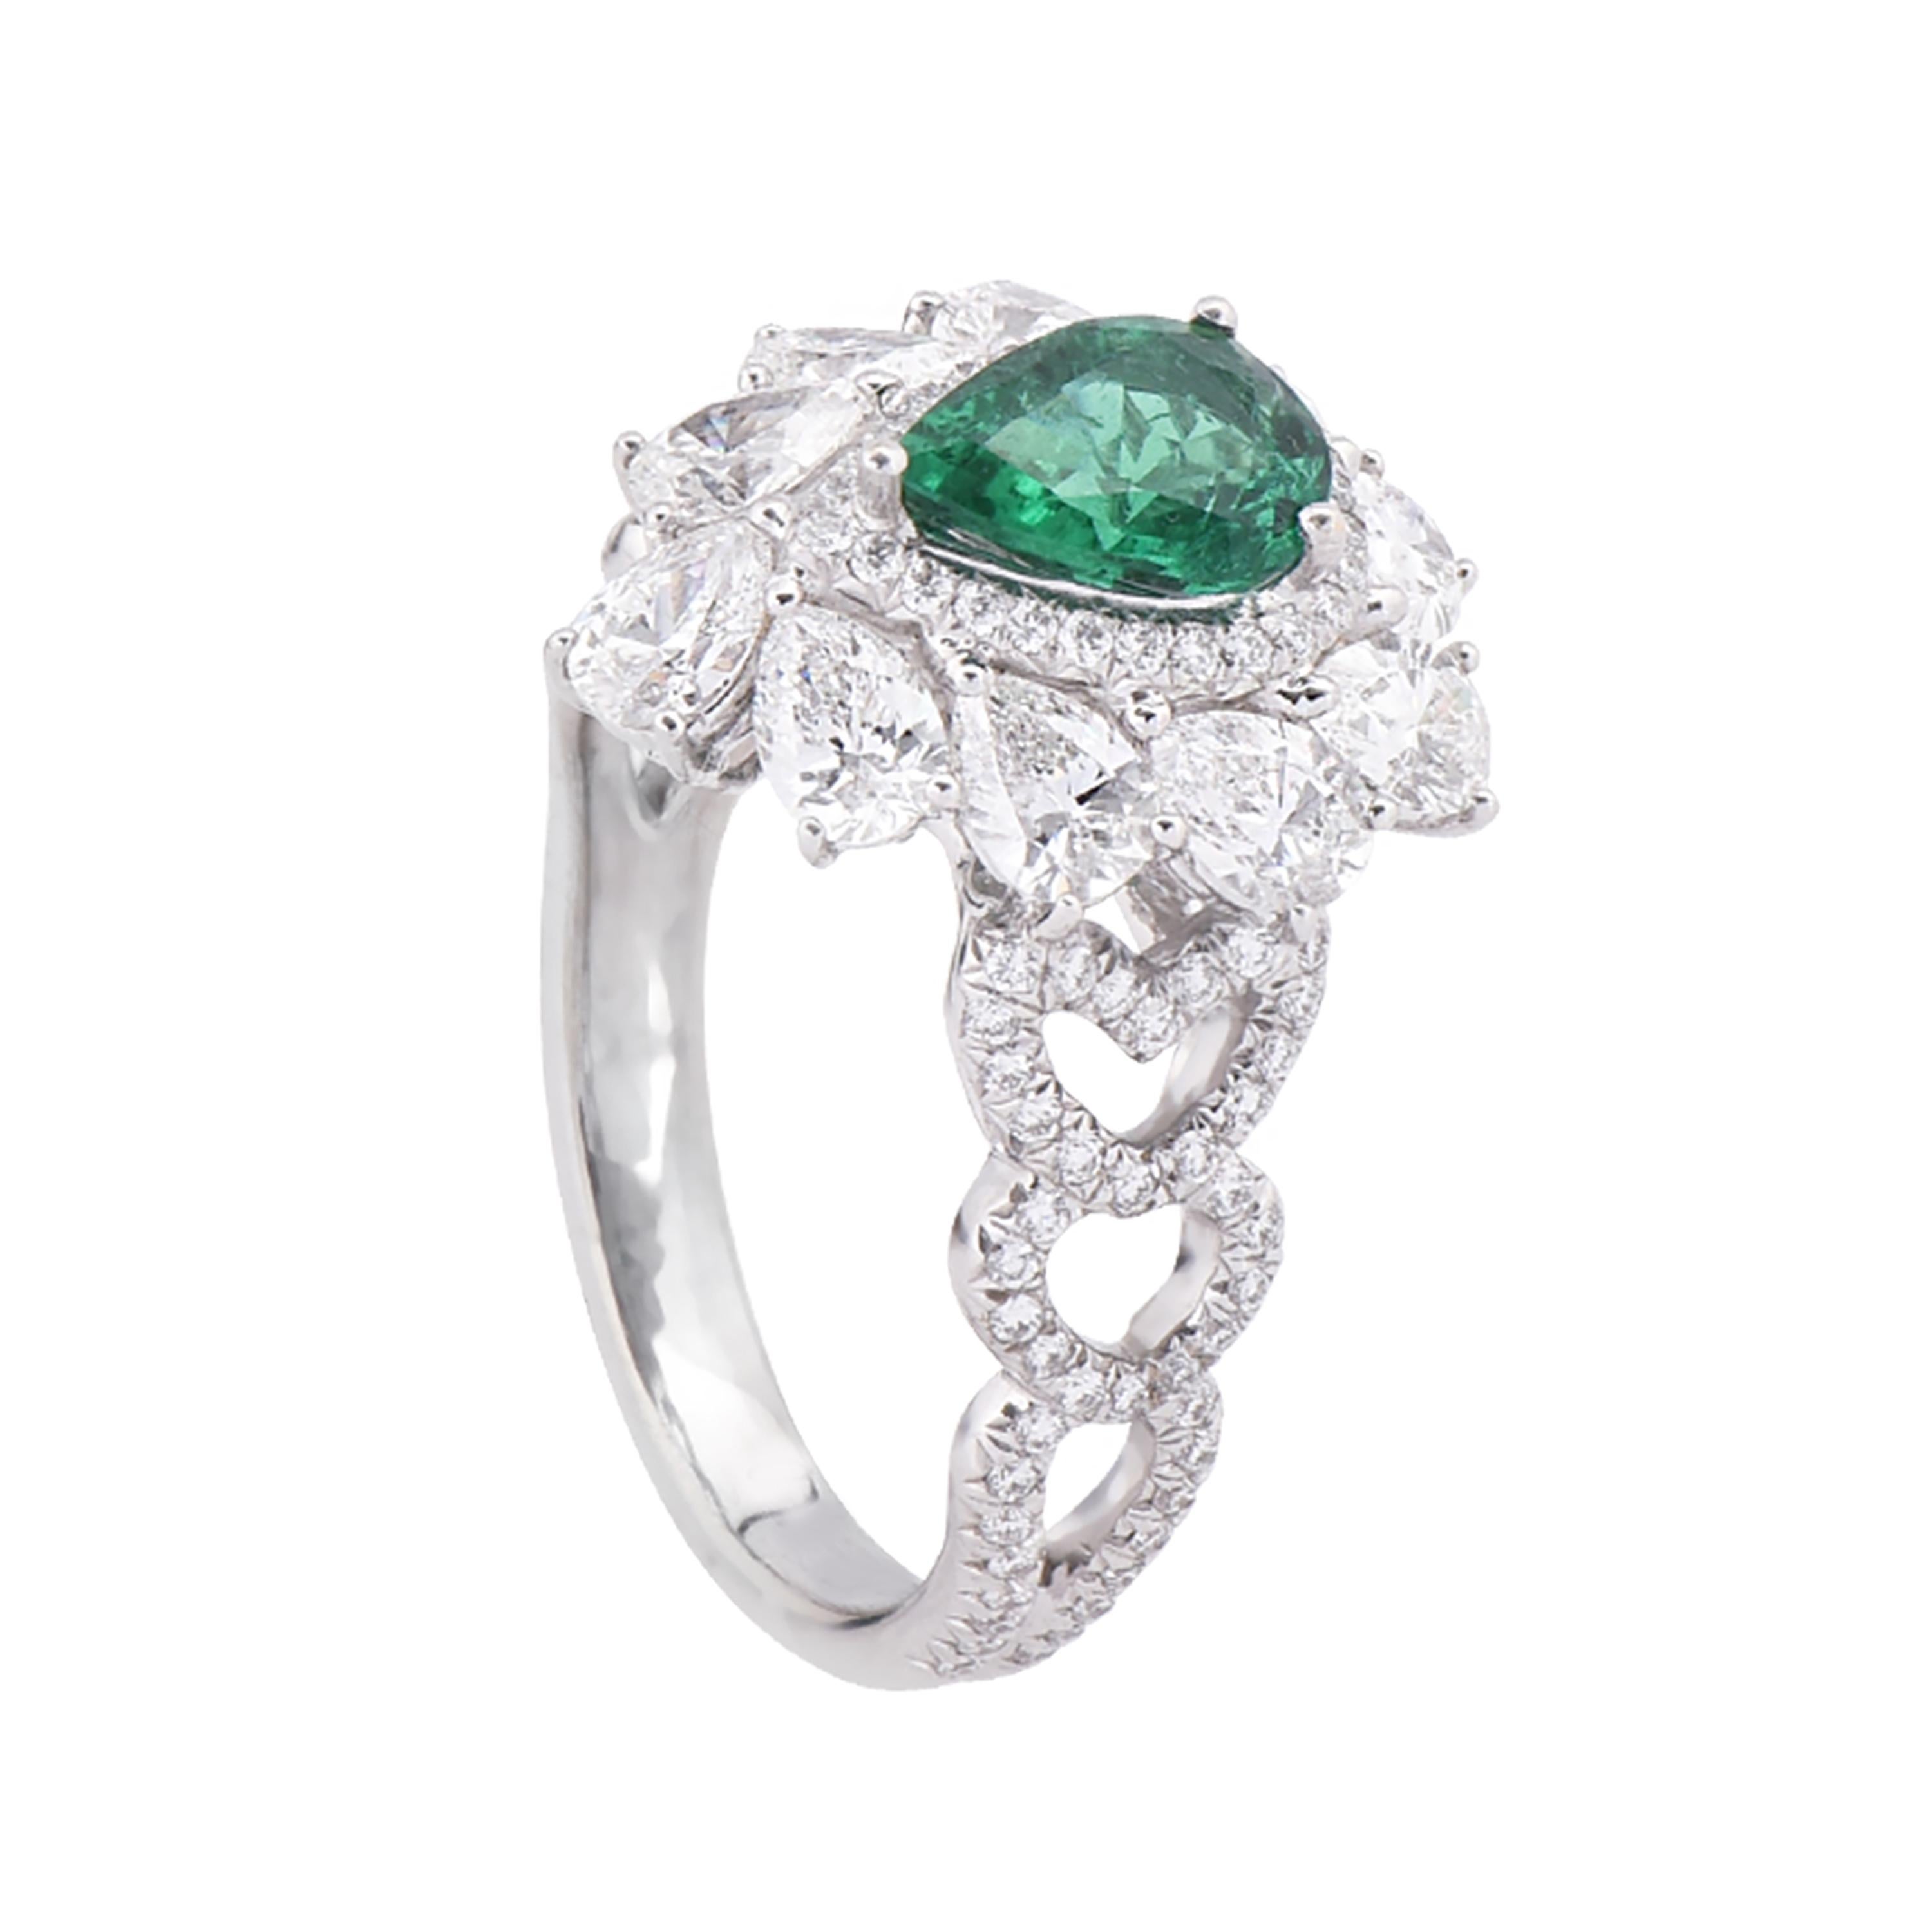 18 karat white gold emerald cocktail ring from the Viridian collection of Laviere. The ring, certified by IGI, is set with a 0.85 carats pear shape emerald, 0.37 carats round brilliant and 1.55 carats pear shape brilliant diamonds. 
Gold Weight 6.68